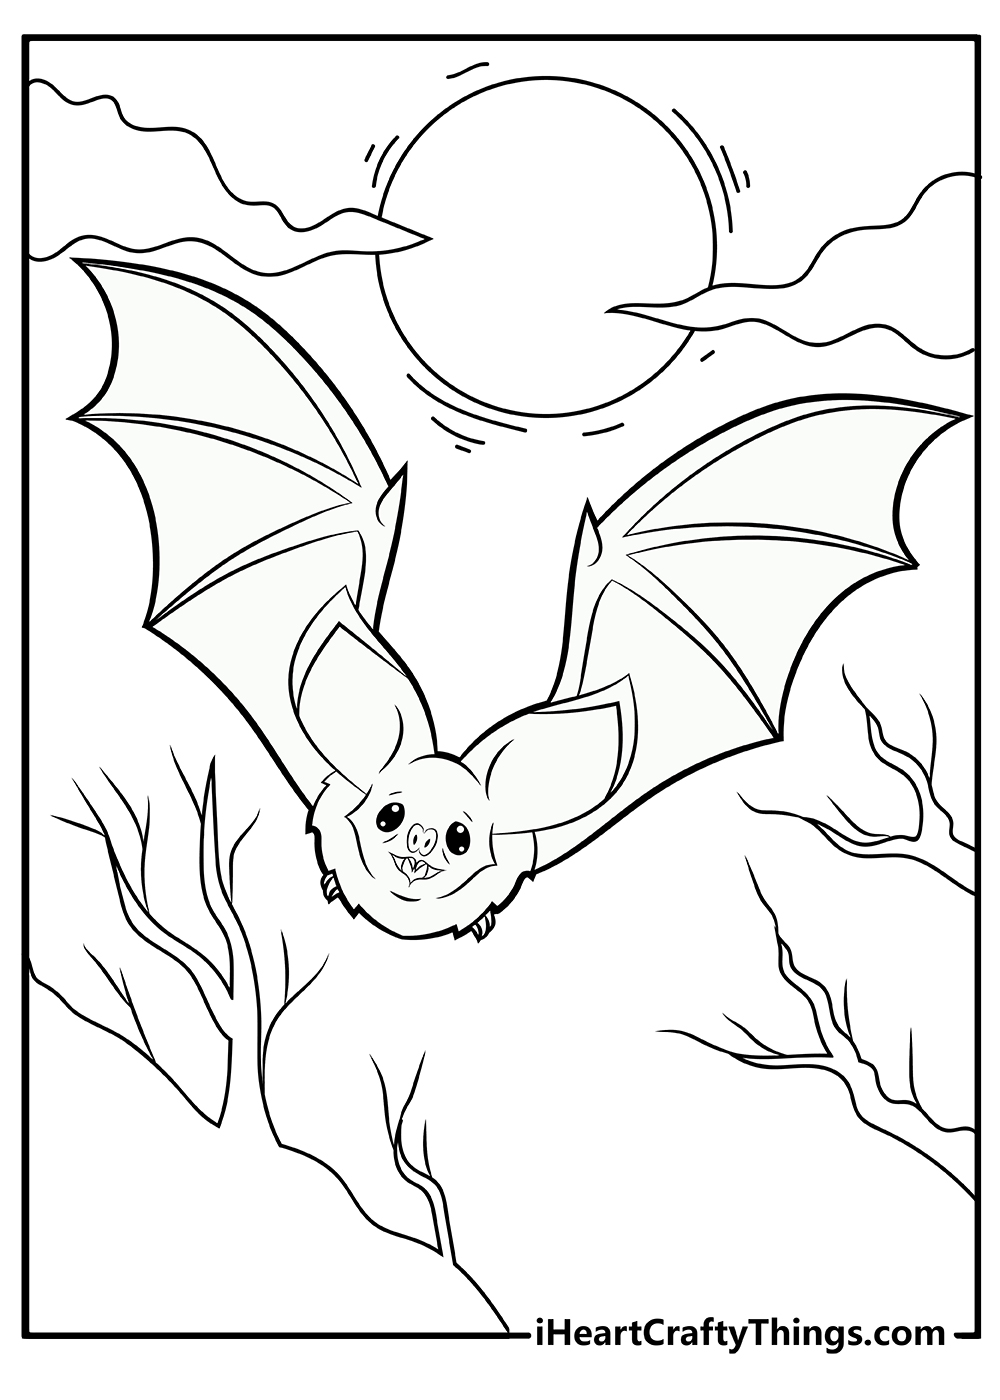 Bat Coloring Pages for preschoolers